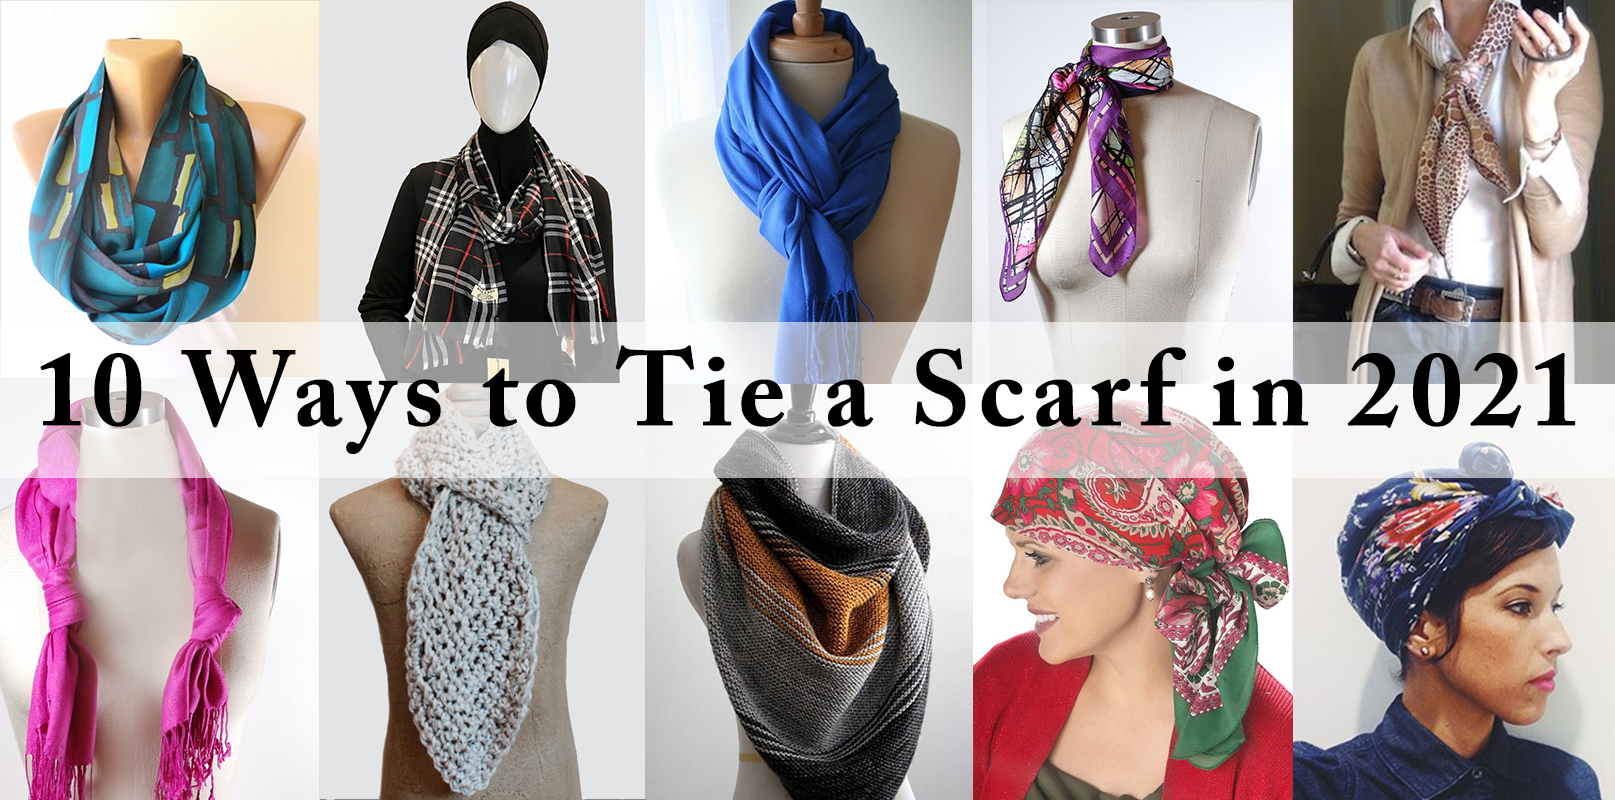 10 ways to tie a scarf in 2021